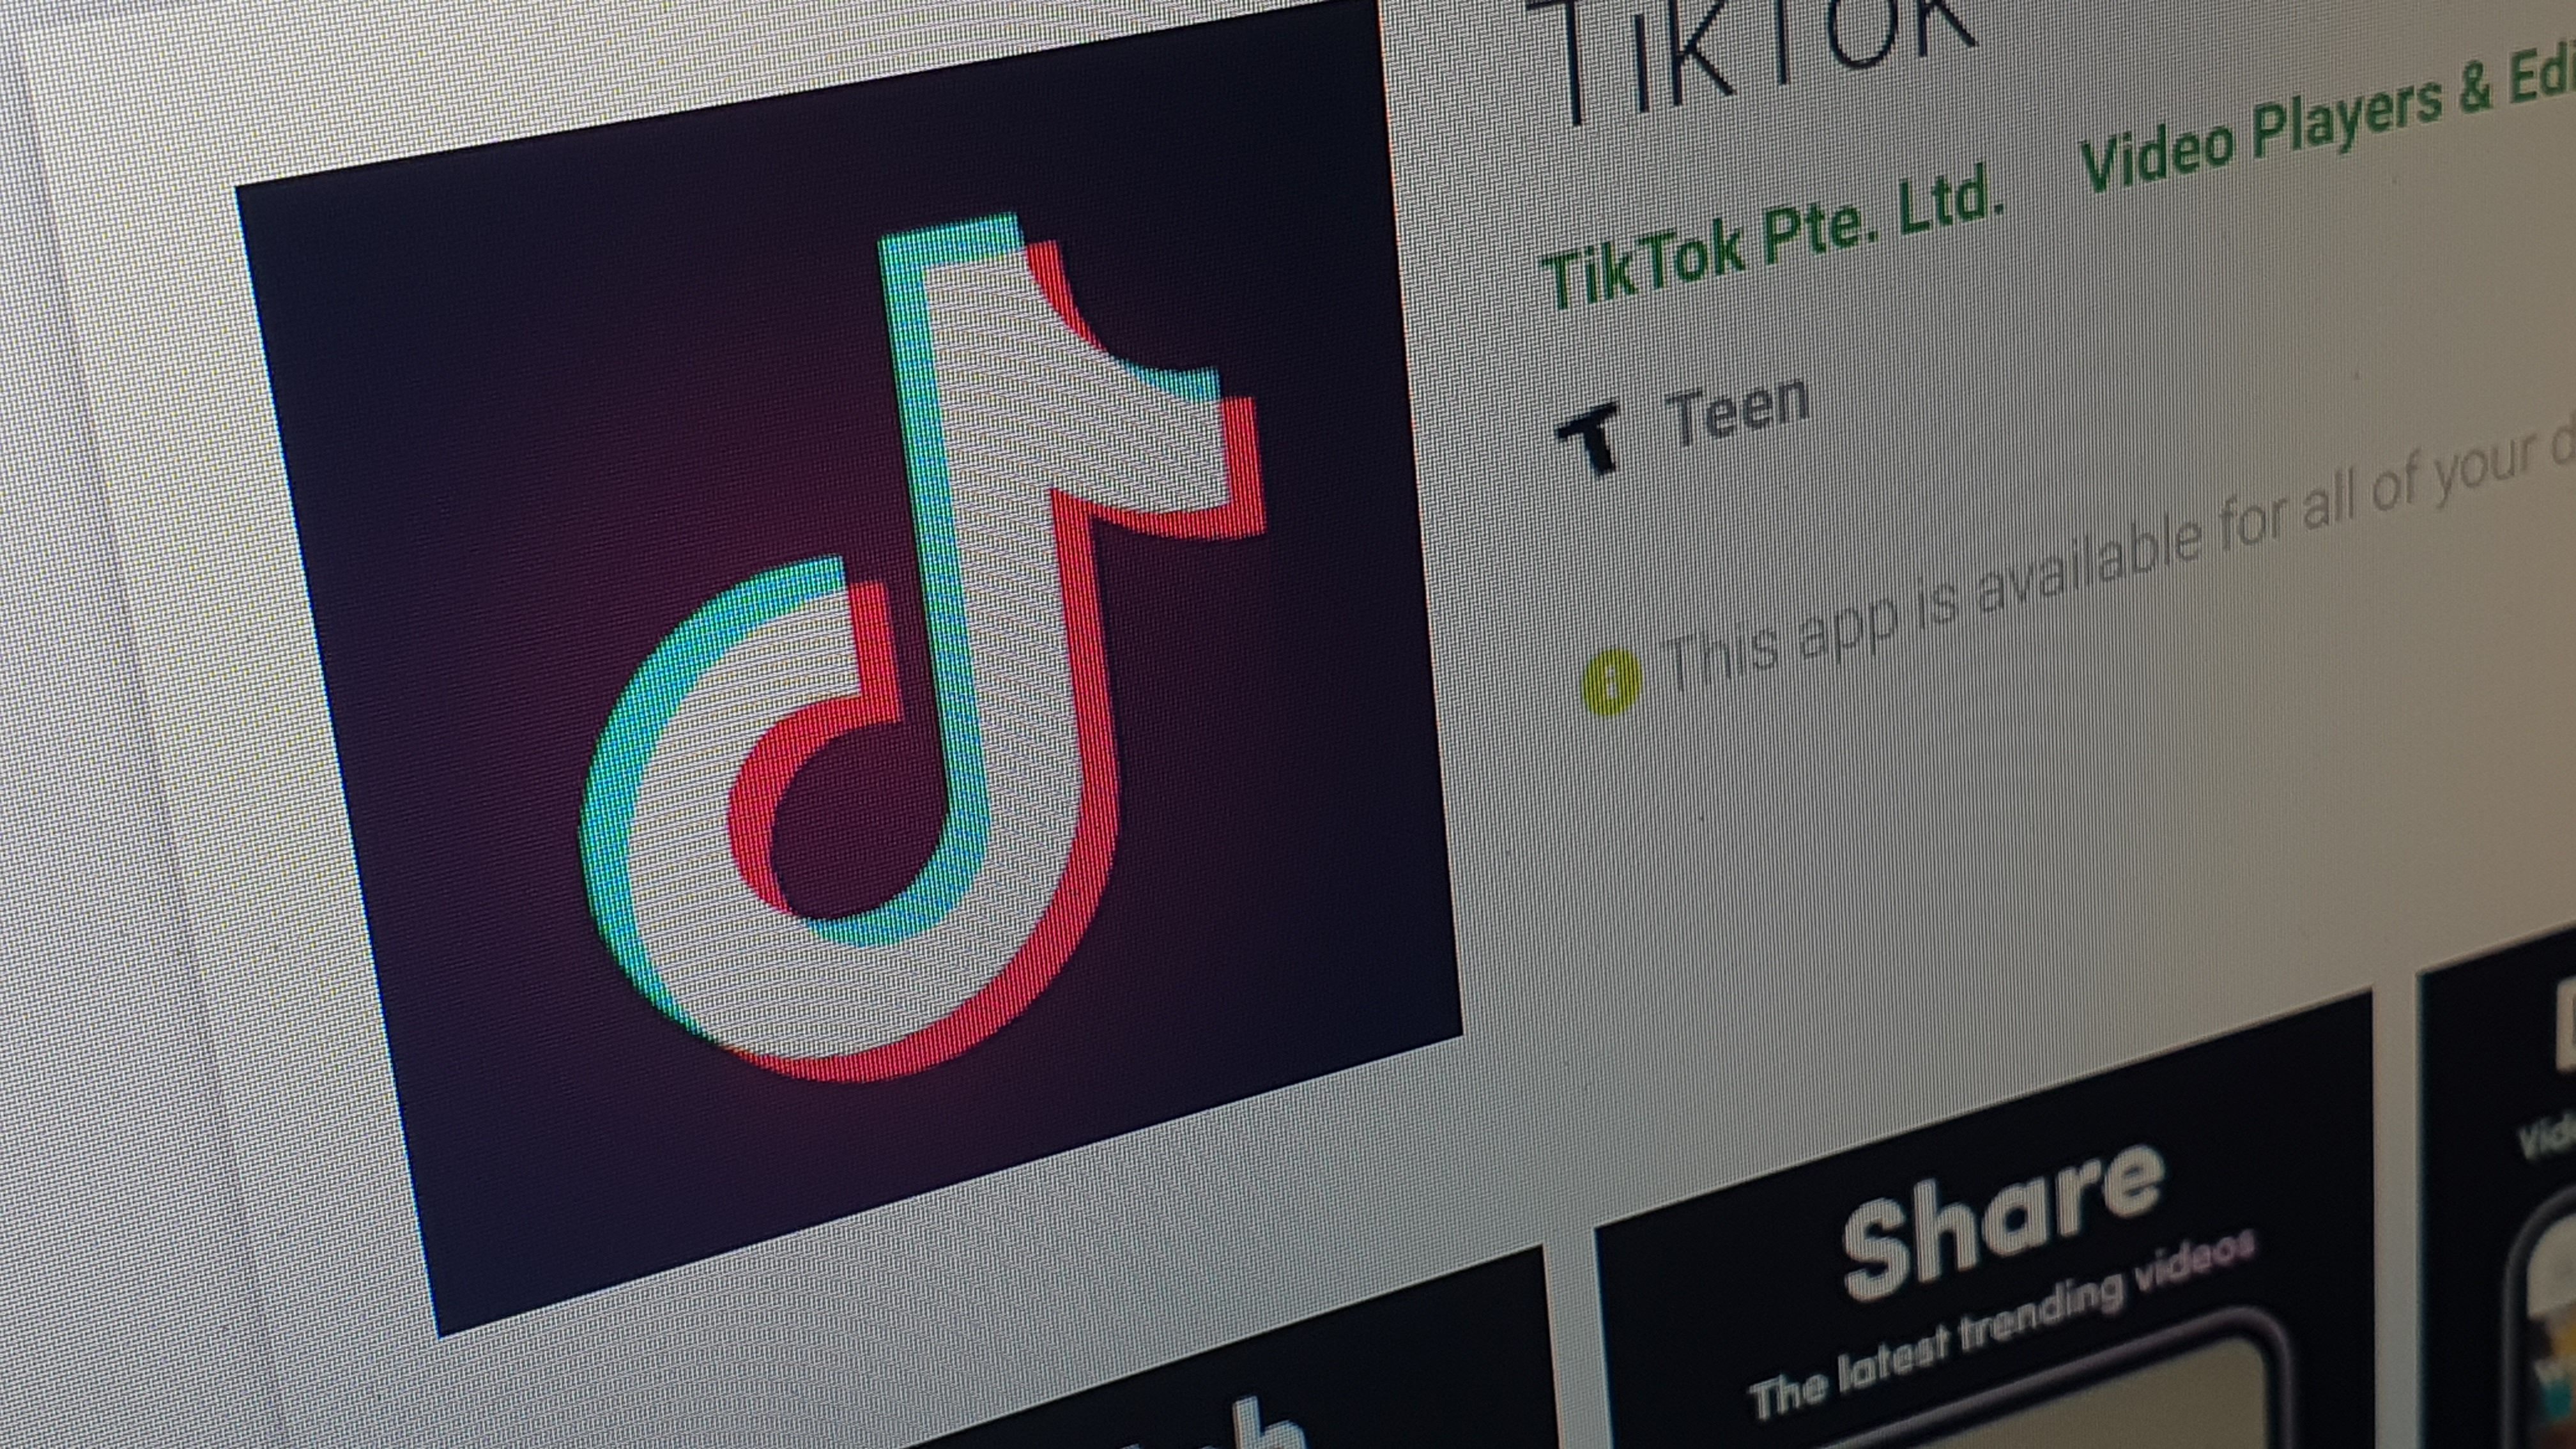 TikTok lets users apply for jobs in the US with video resumes